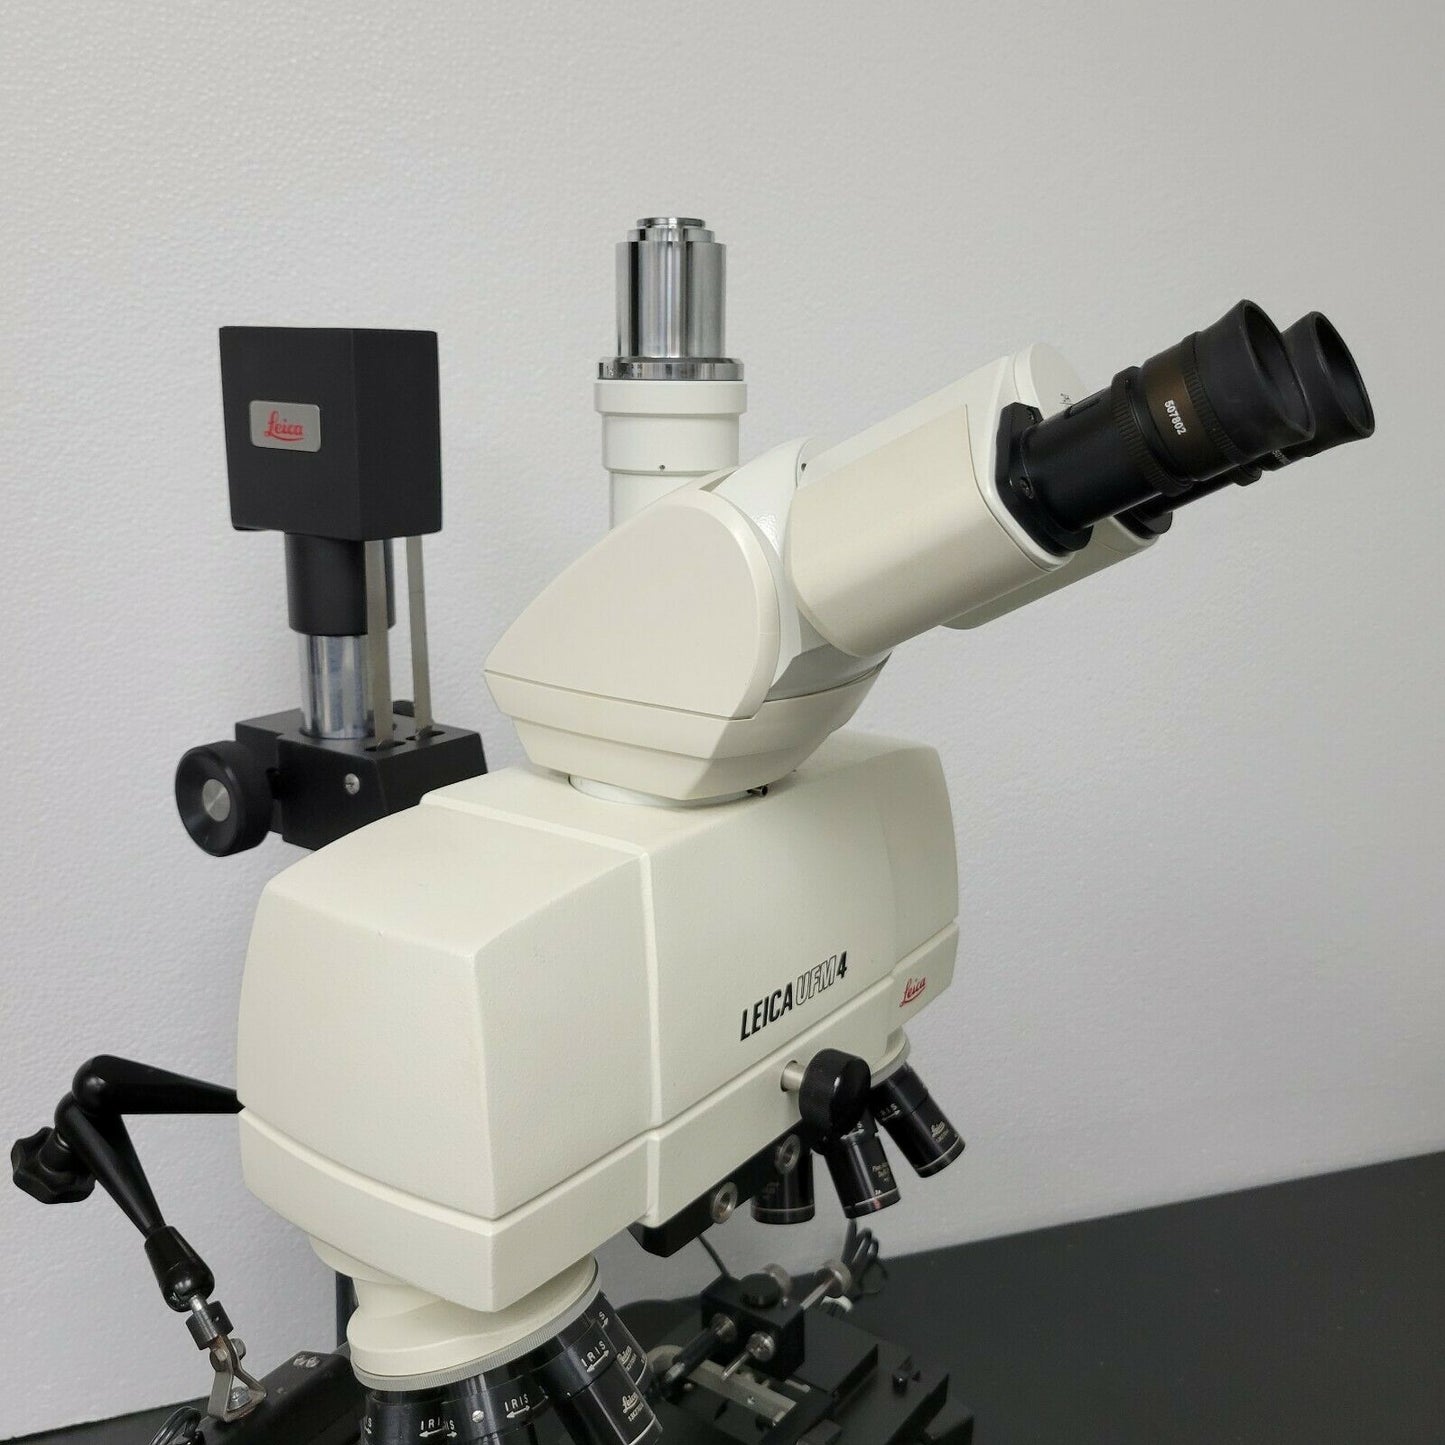 Leica Microscope UFM4 Forensic Comparison System with Tilting Ergo Head - microscopemarketplace